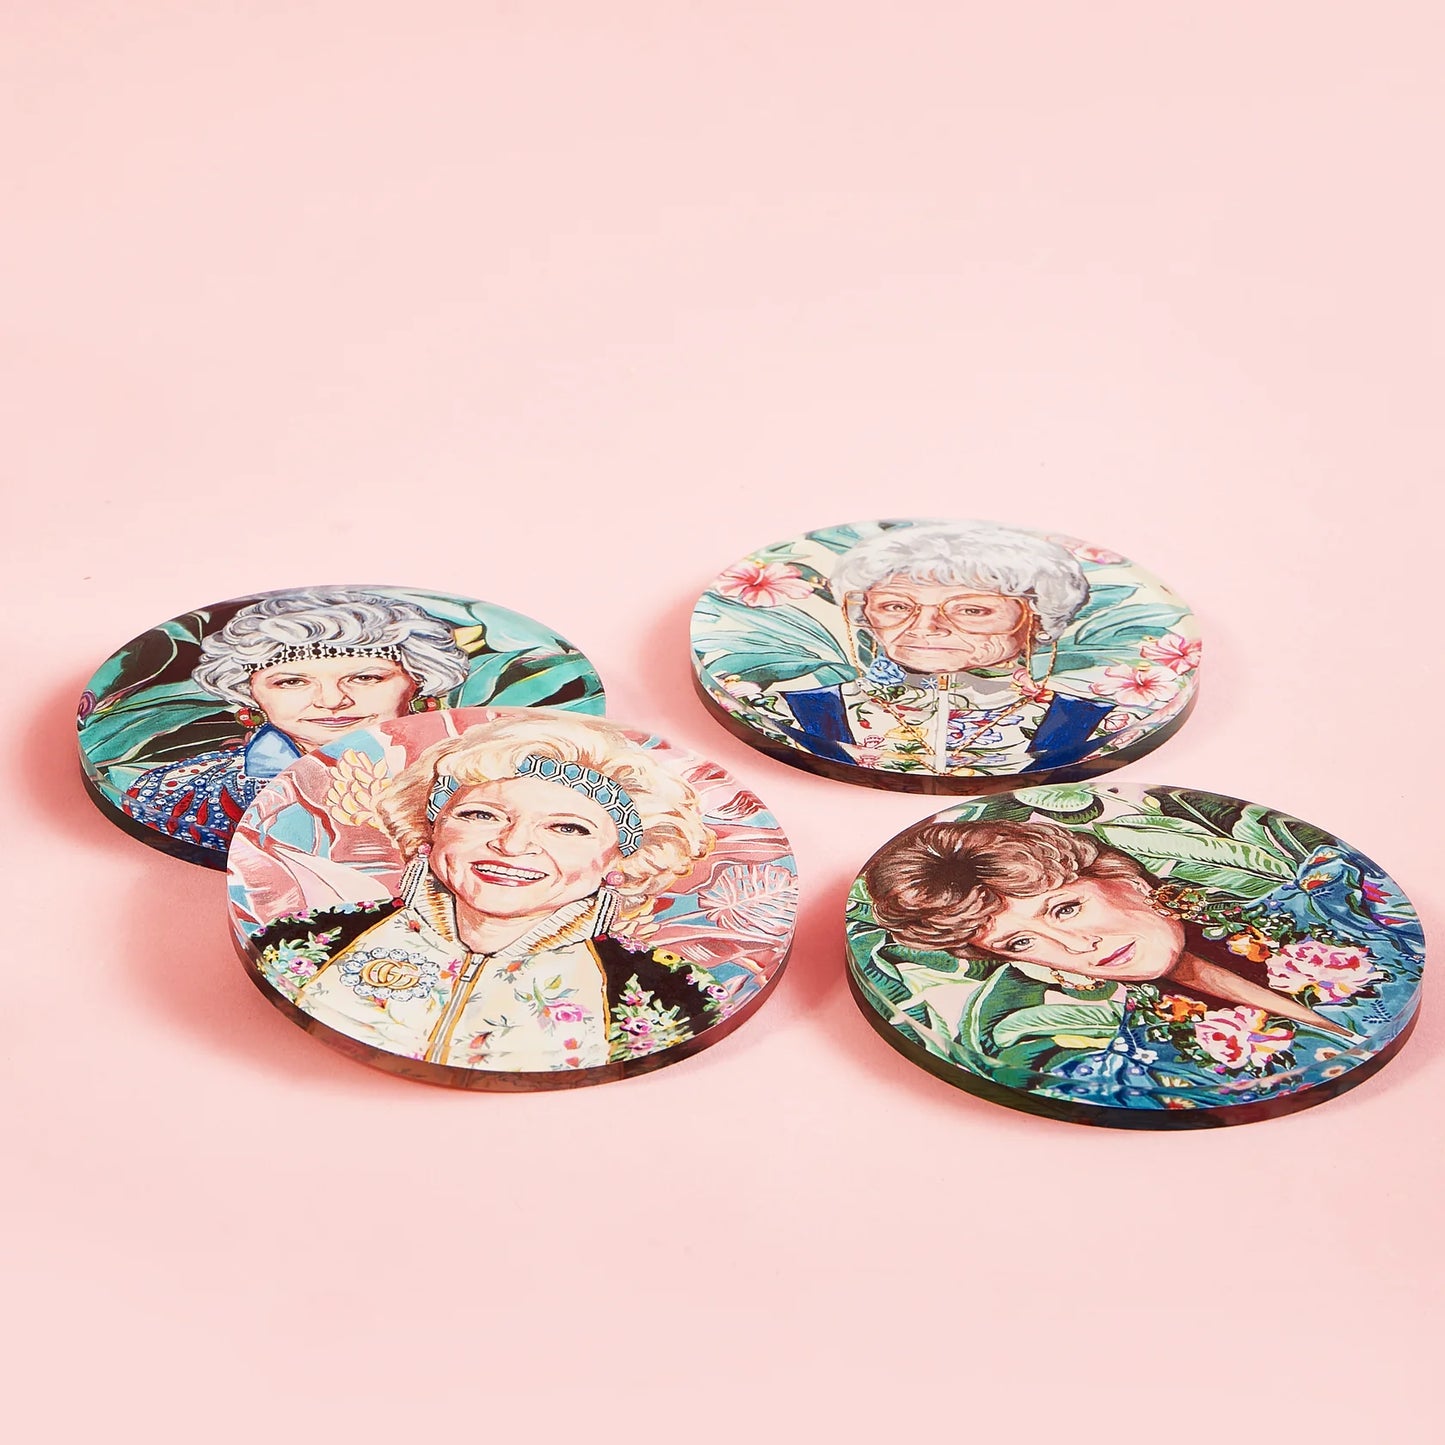 Home- Tart By Taylor Golden Gals Set of Four Coasters